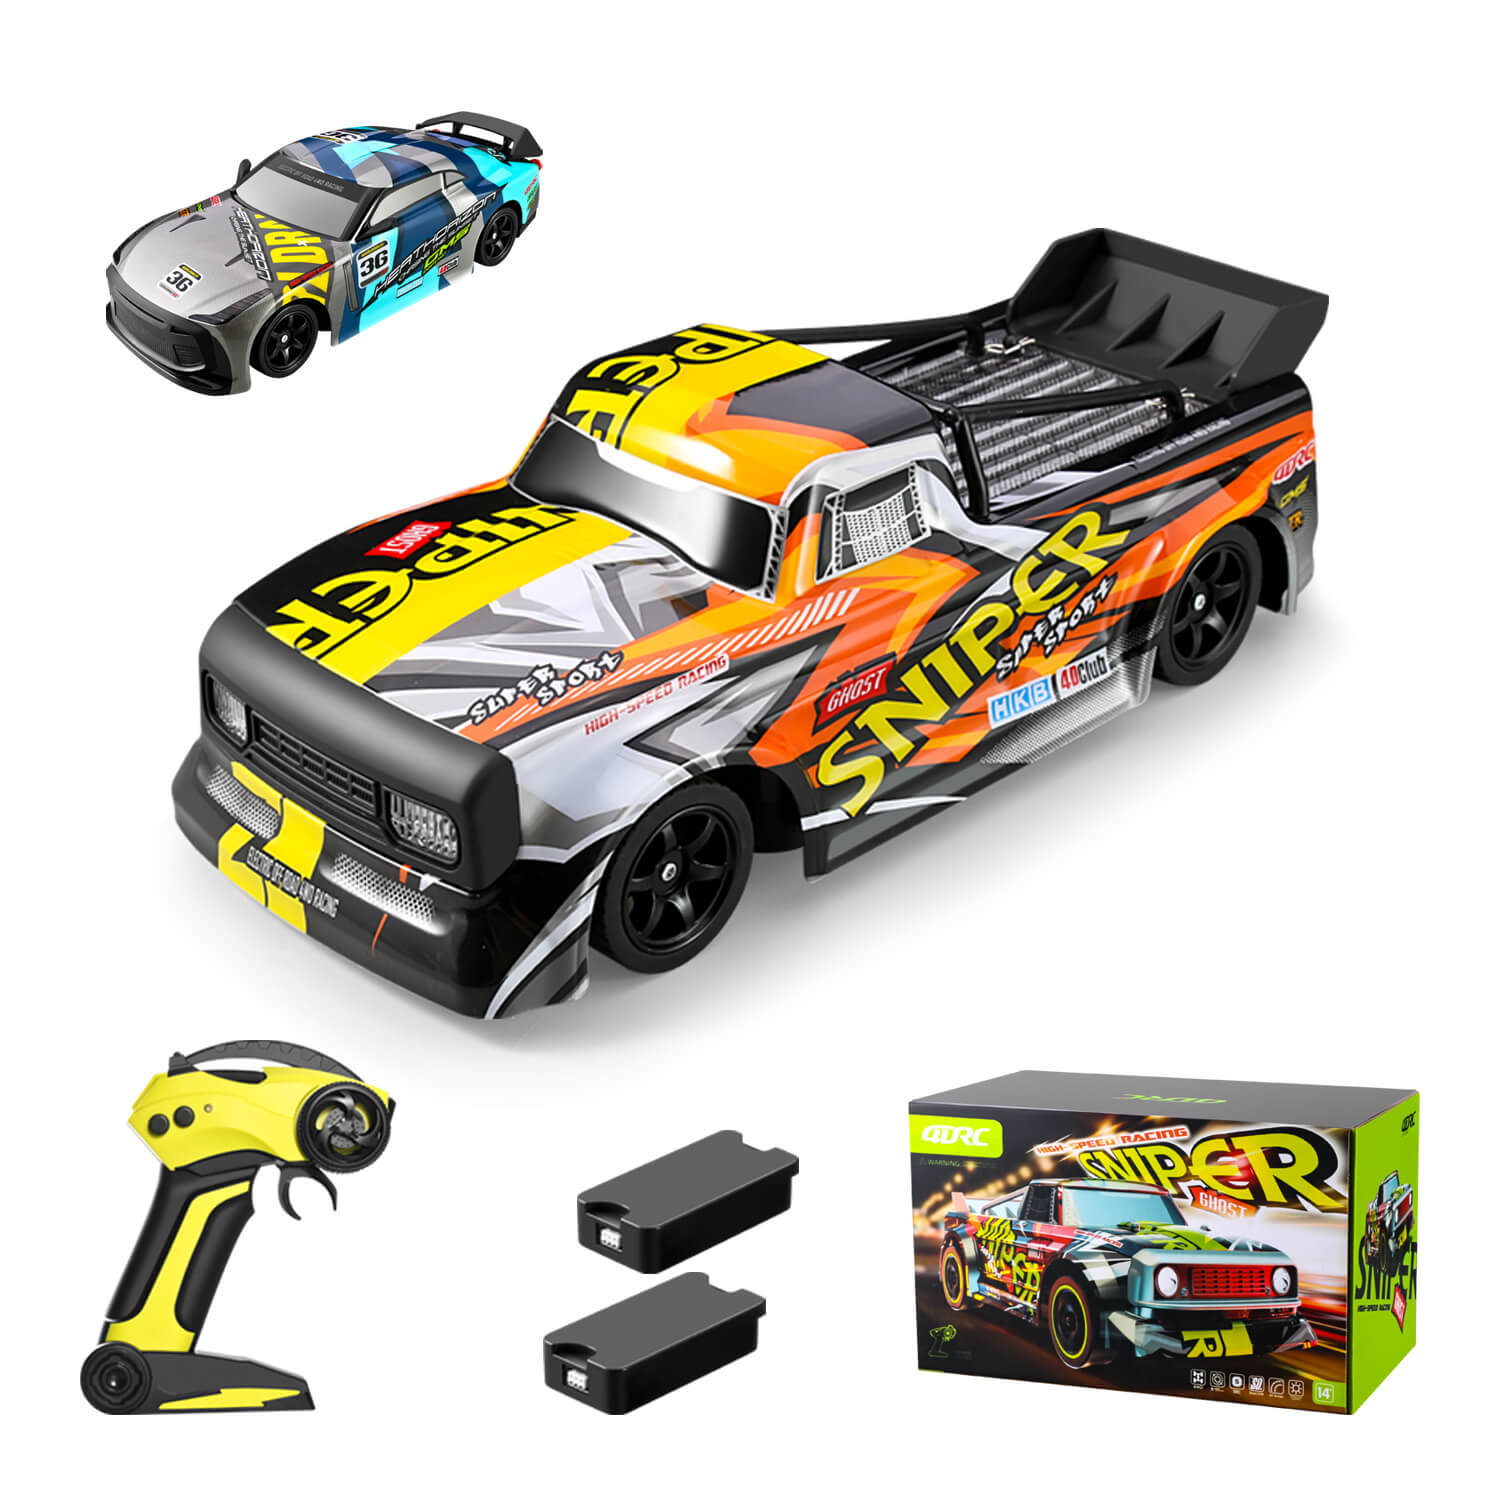 4D-H4 remote control car  remote control high-speed racing 4WD stunt car  30km/h with 2 batteries | 4DRC official website